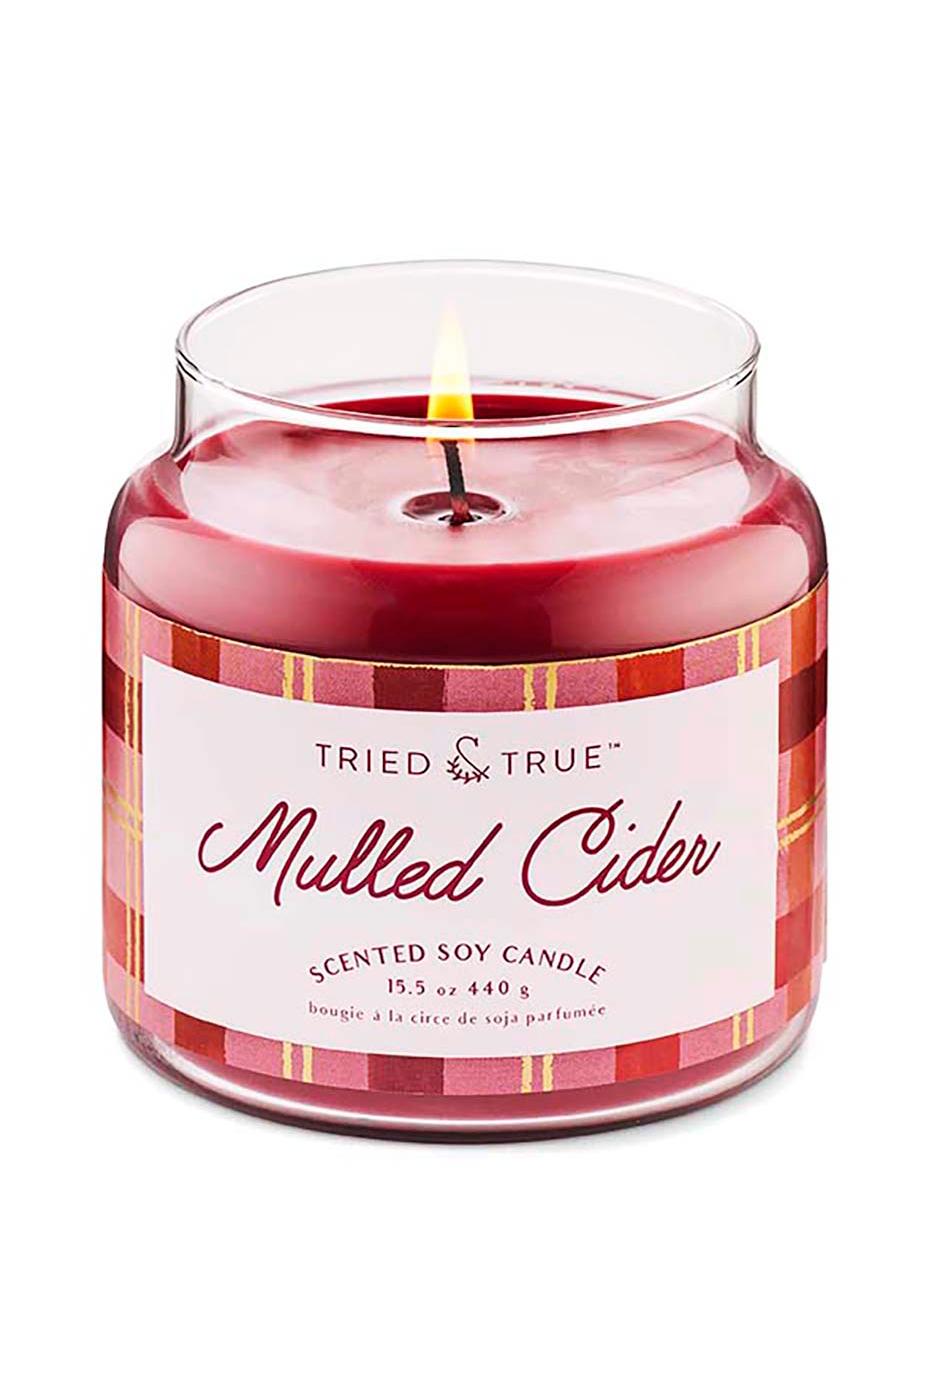 Tried & True Mulled Cider Scented Soy Candle; image 3 of 3